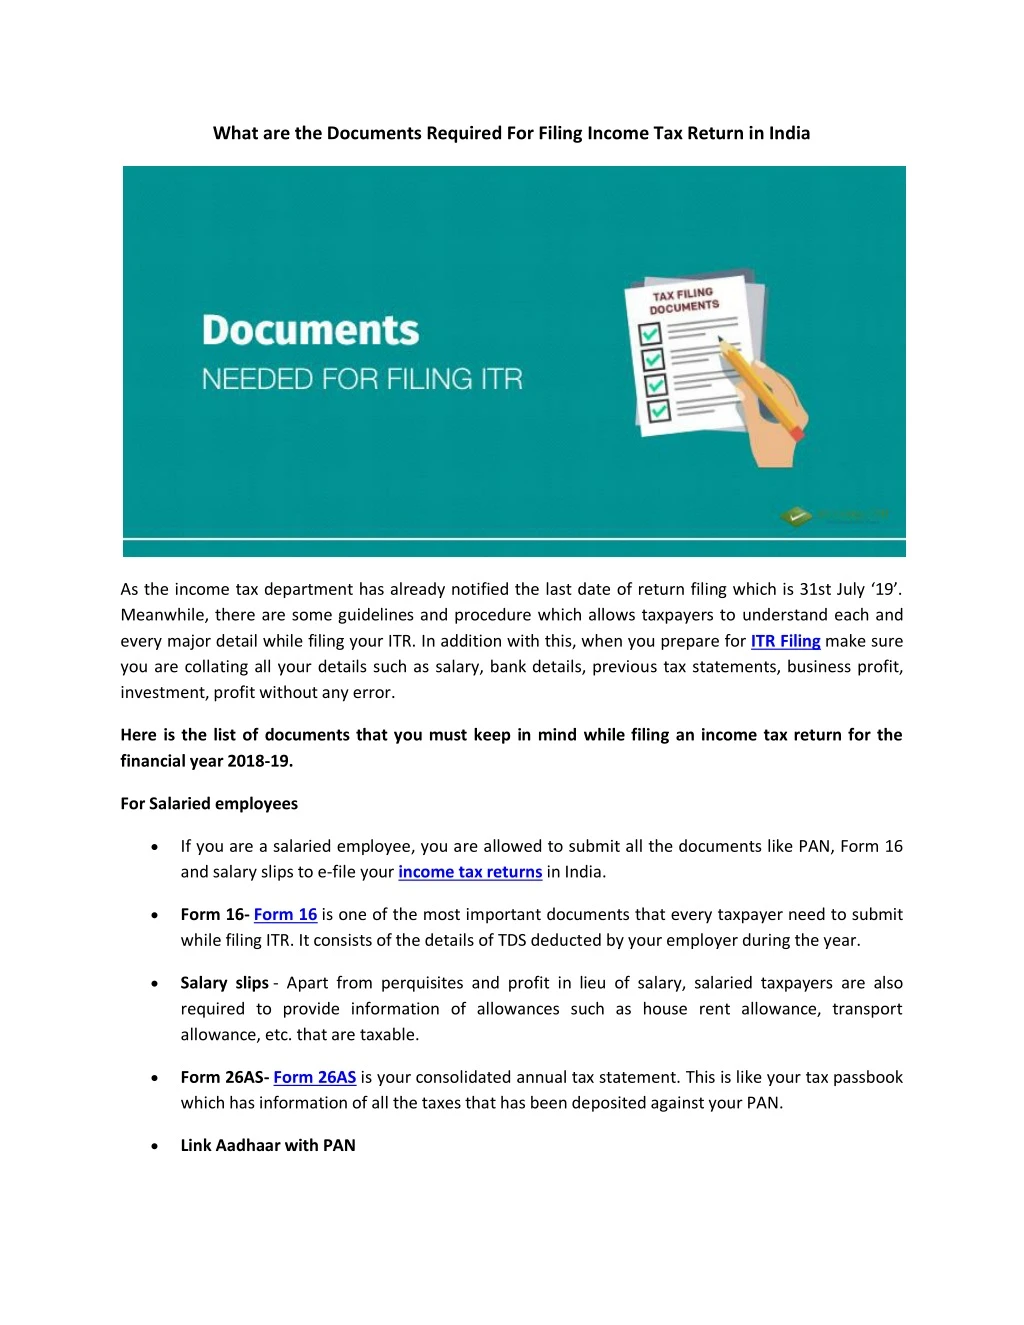 what are the documents required for filing income